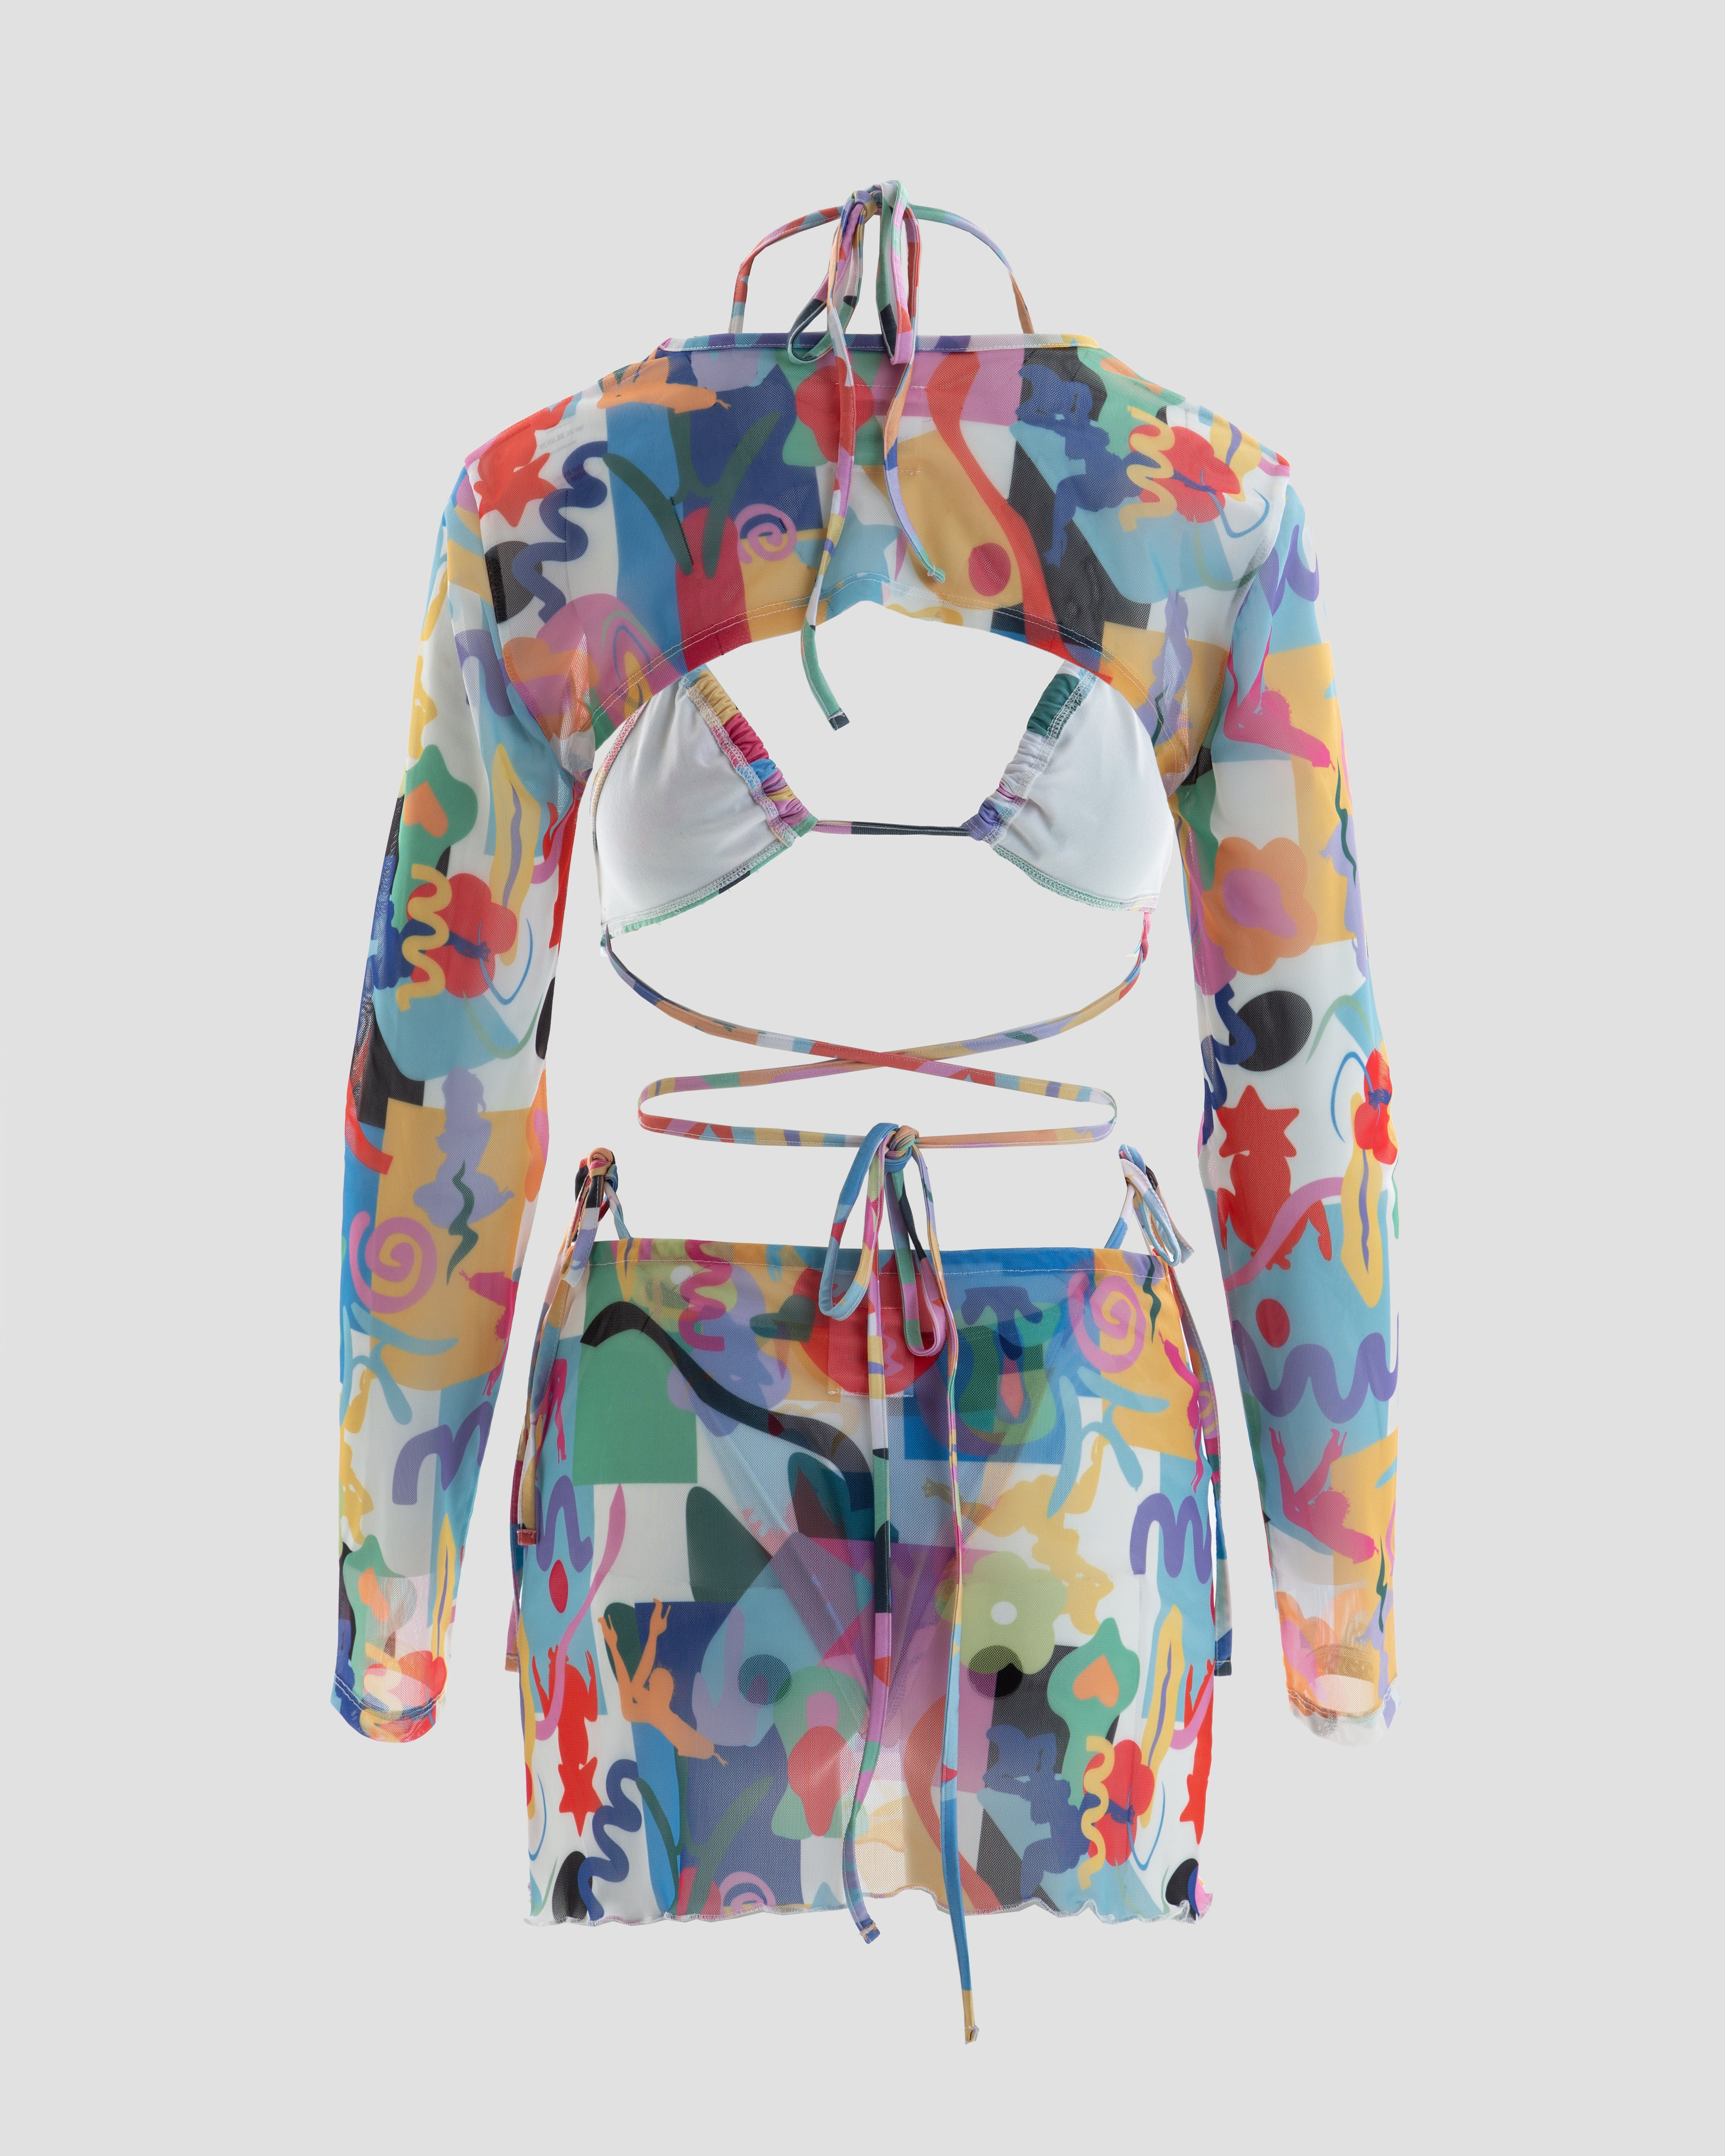 Teeny Mesh Long Sleeve Crop Shrug Top with Graphic Print in Multicolour